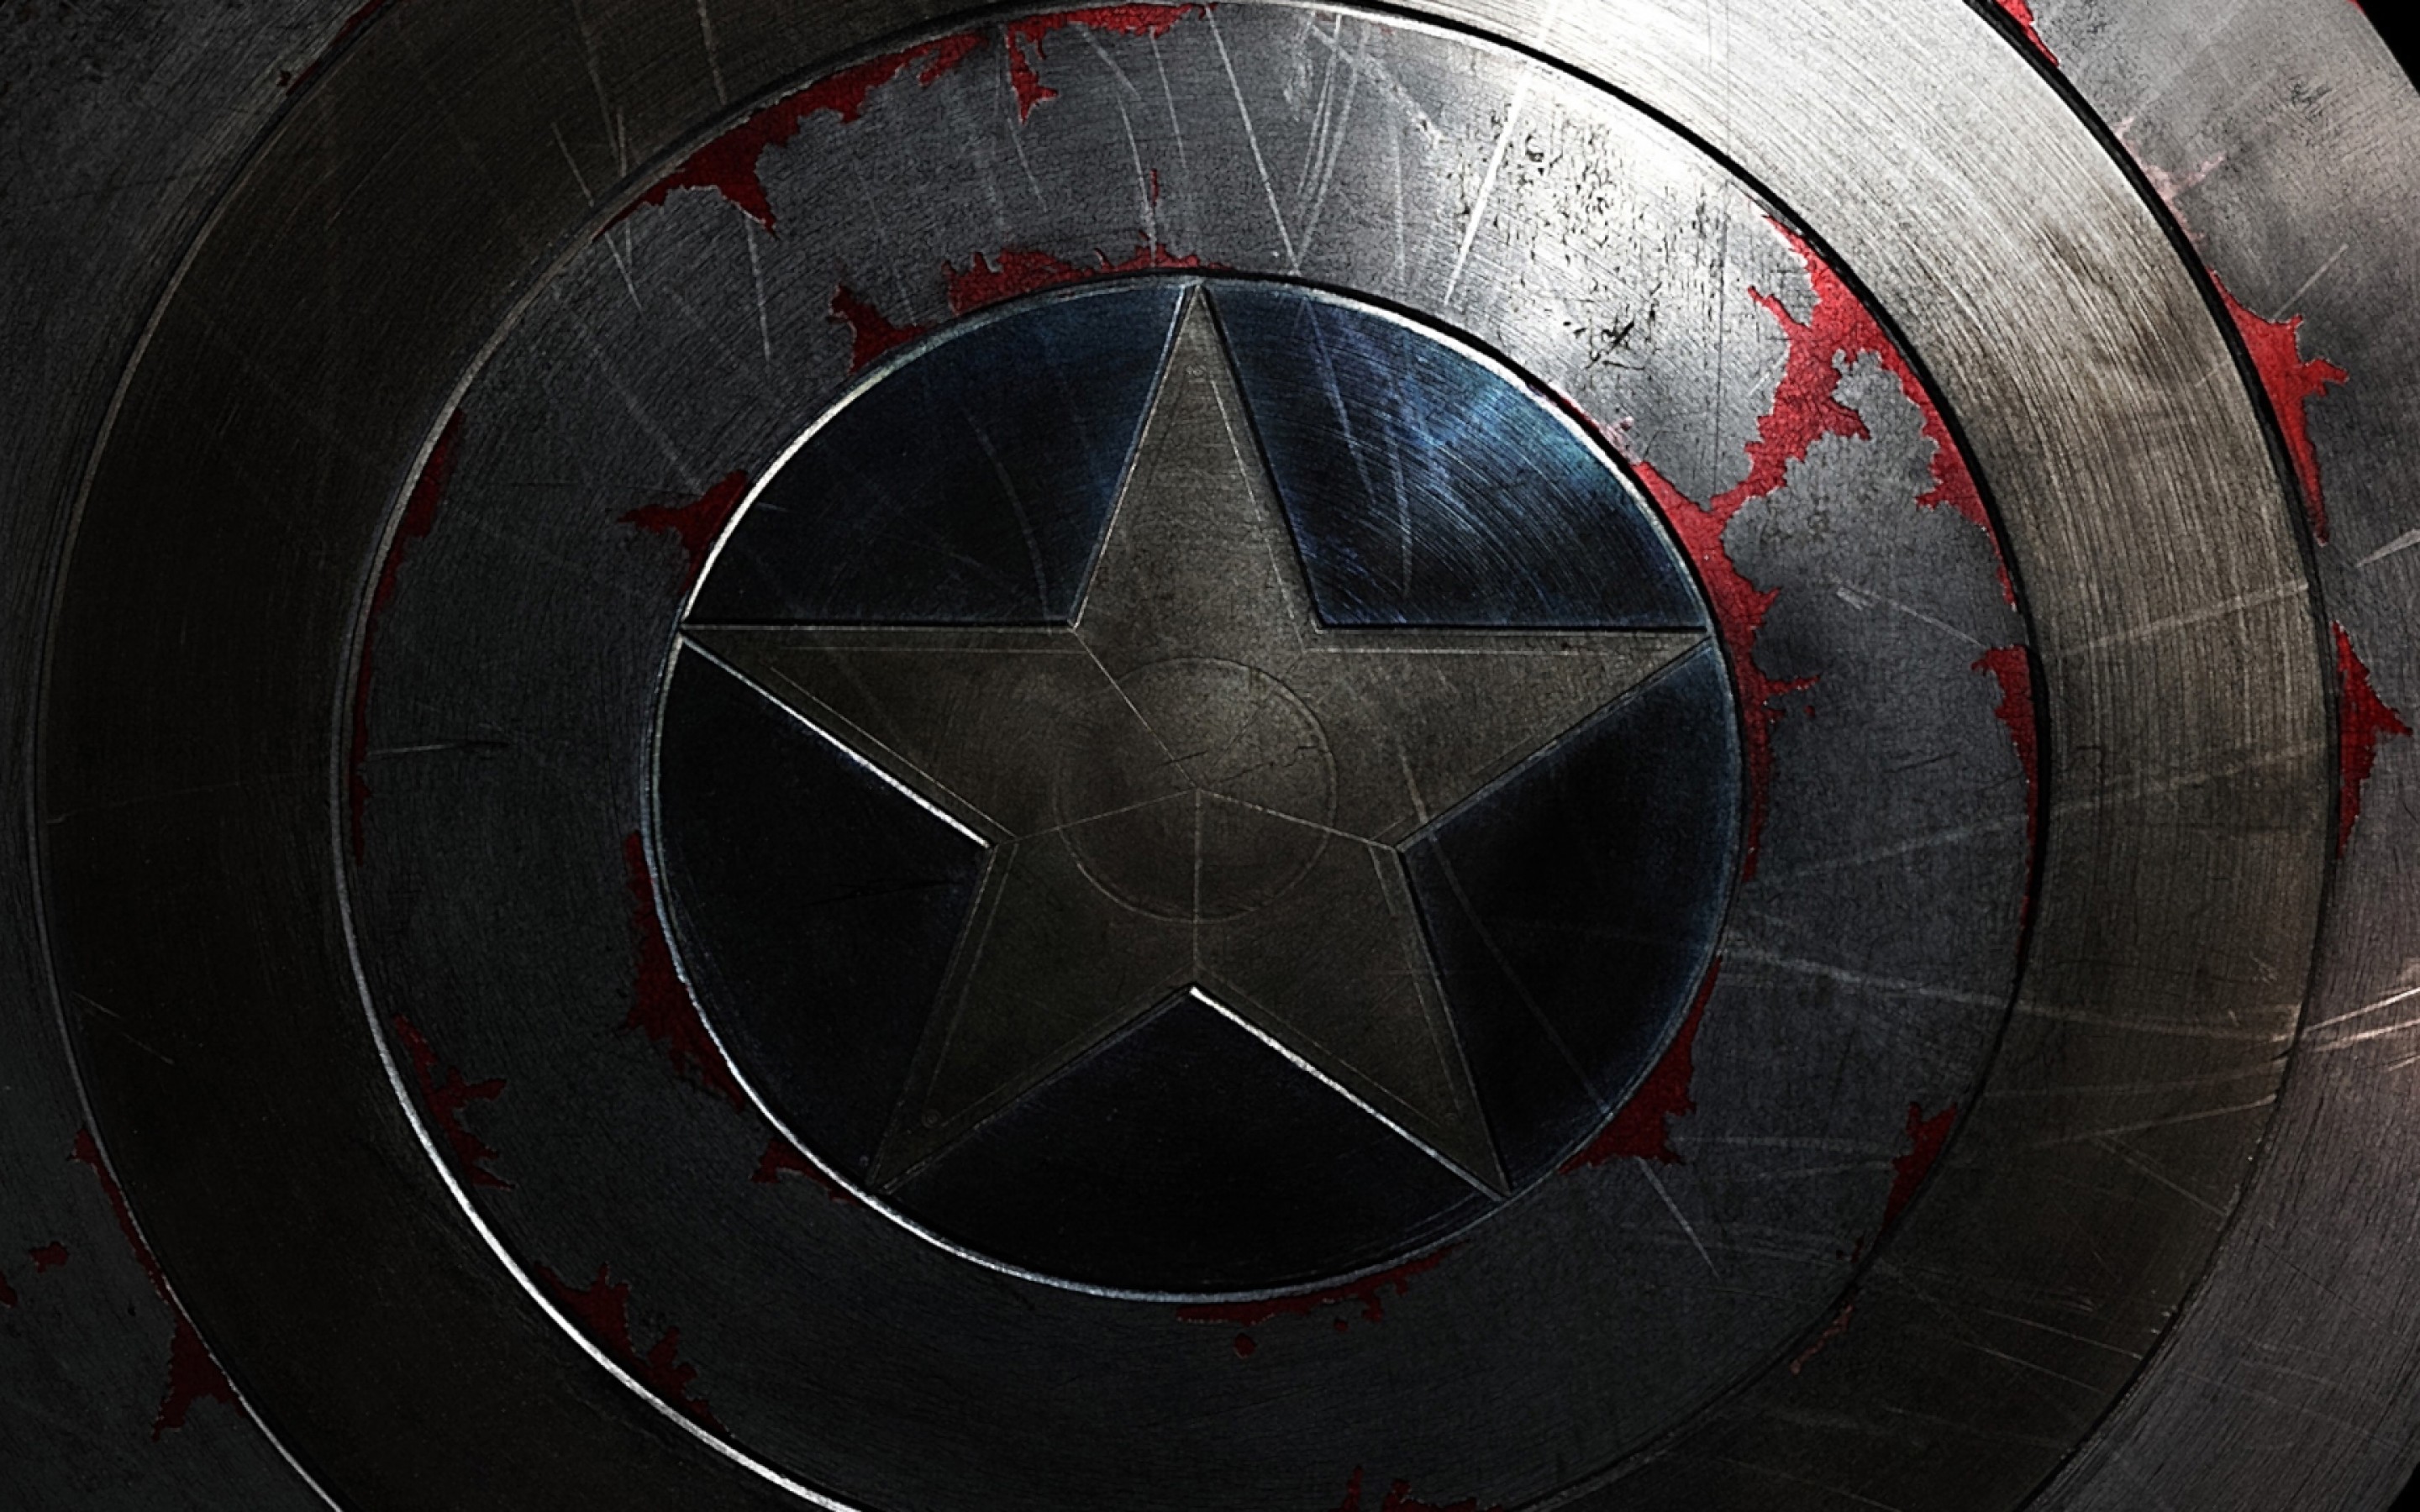 Captain America Logo Wallpapers 81 pictures